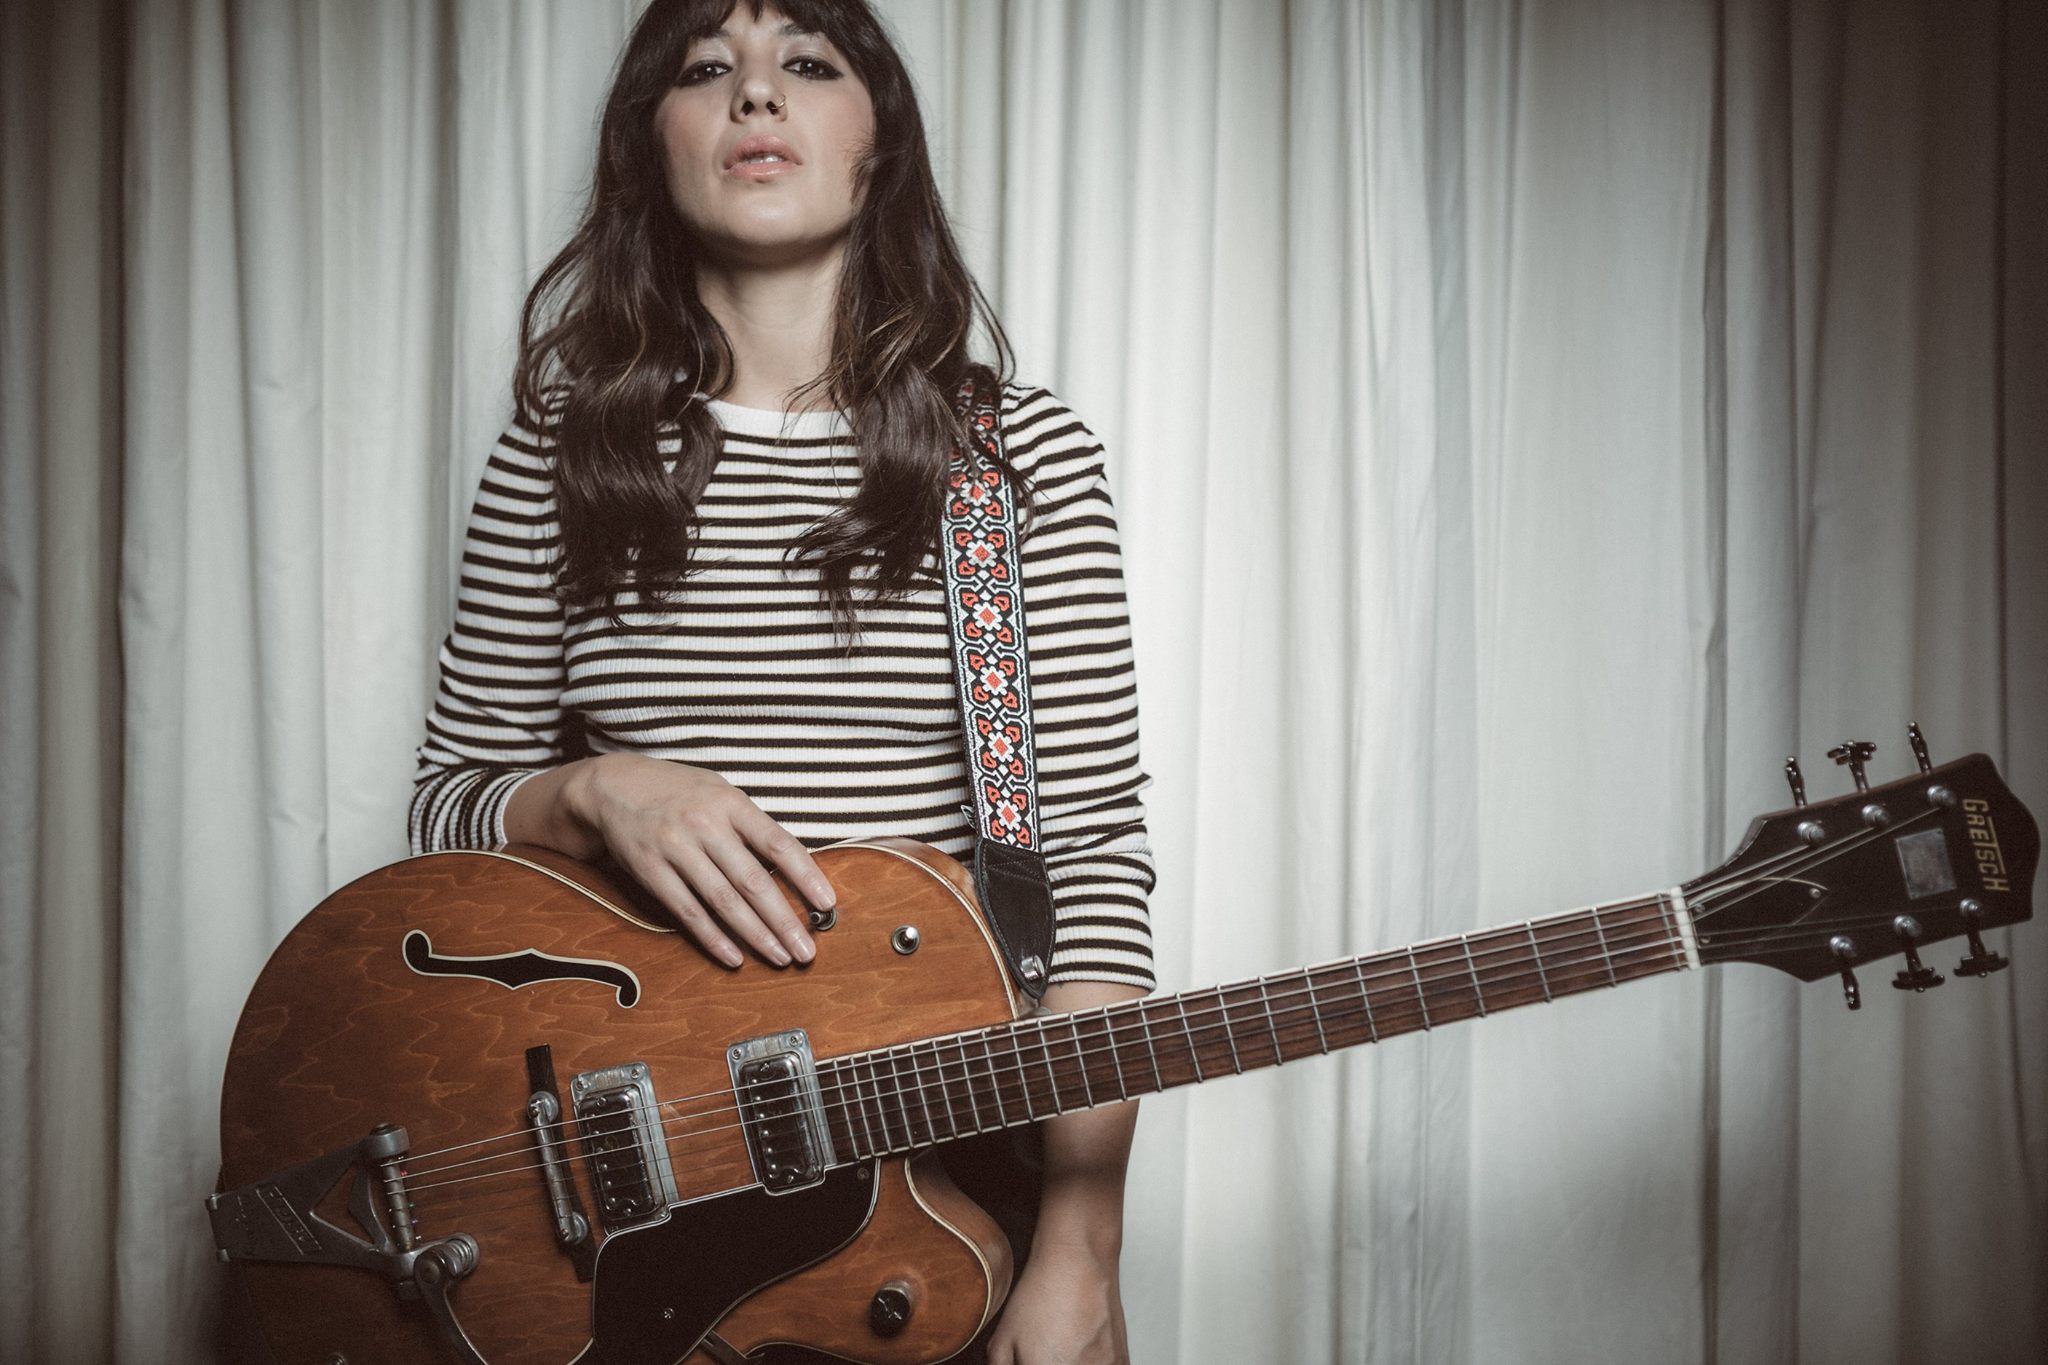 What is Michelle Branch's total net worth